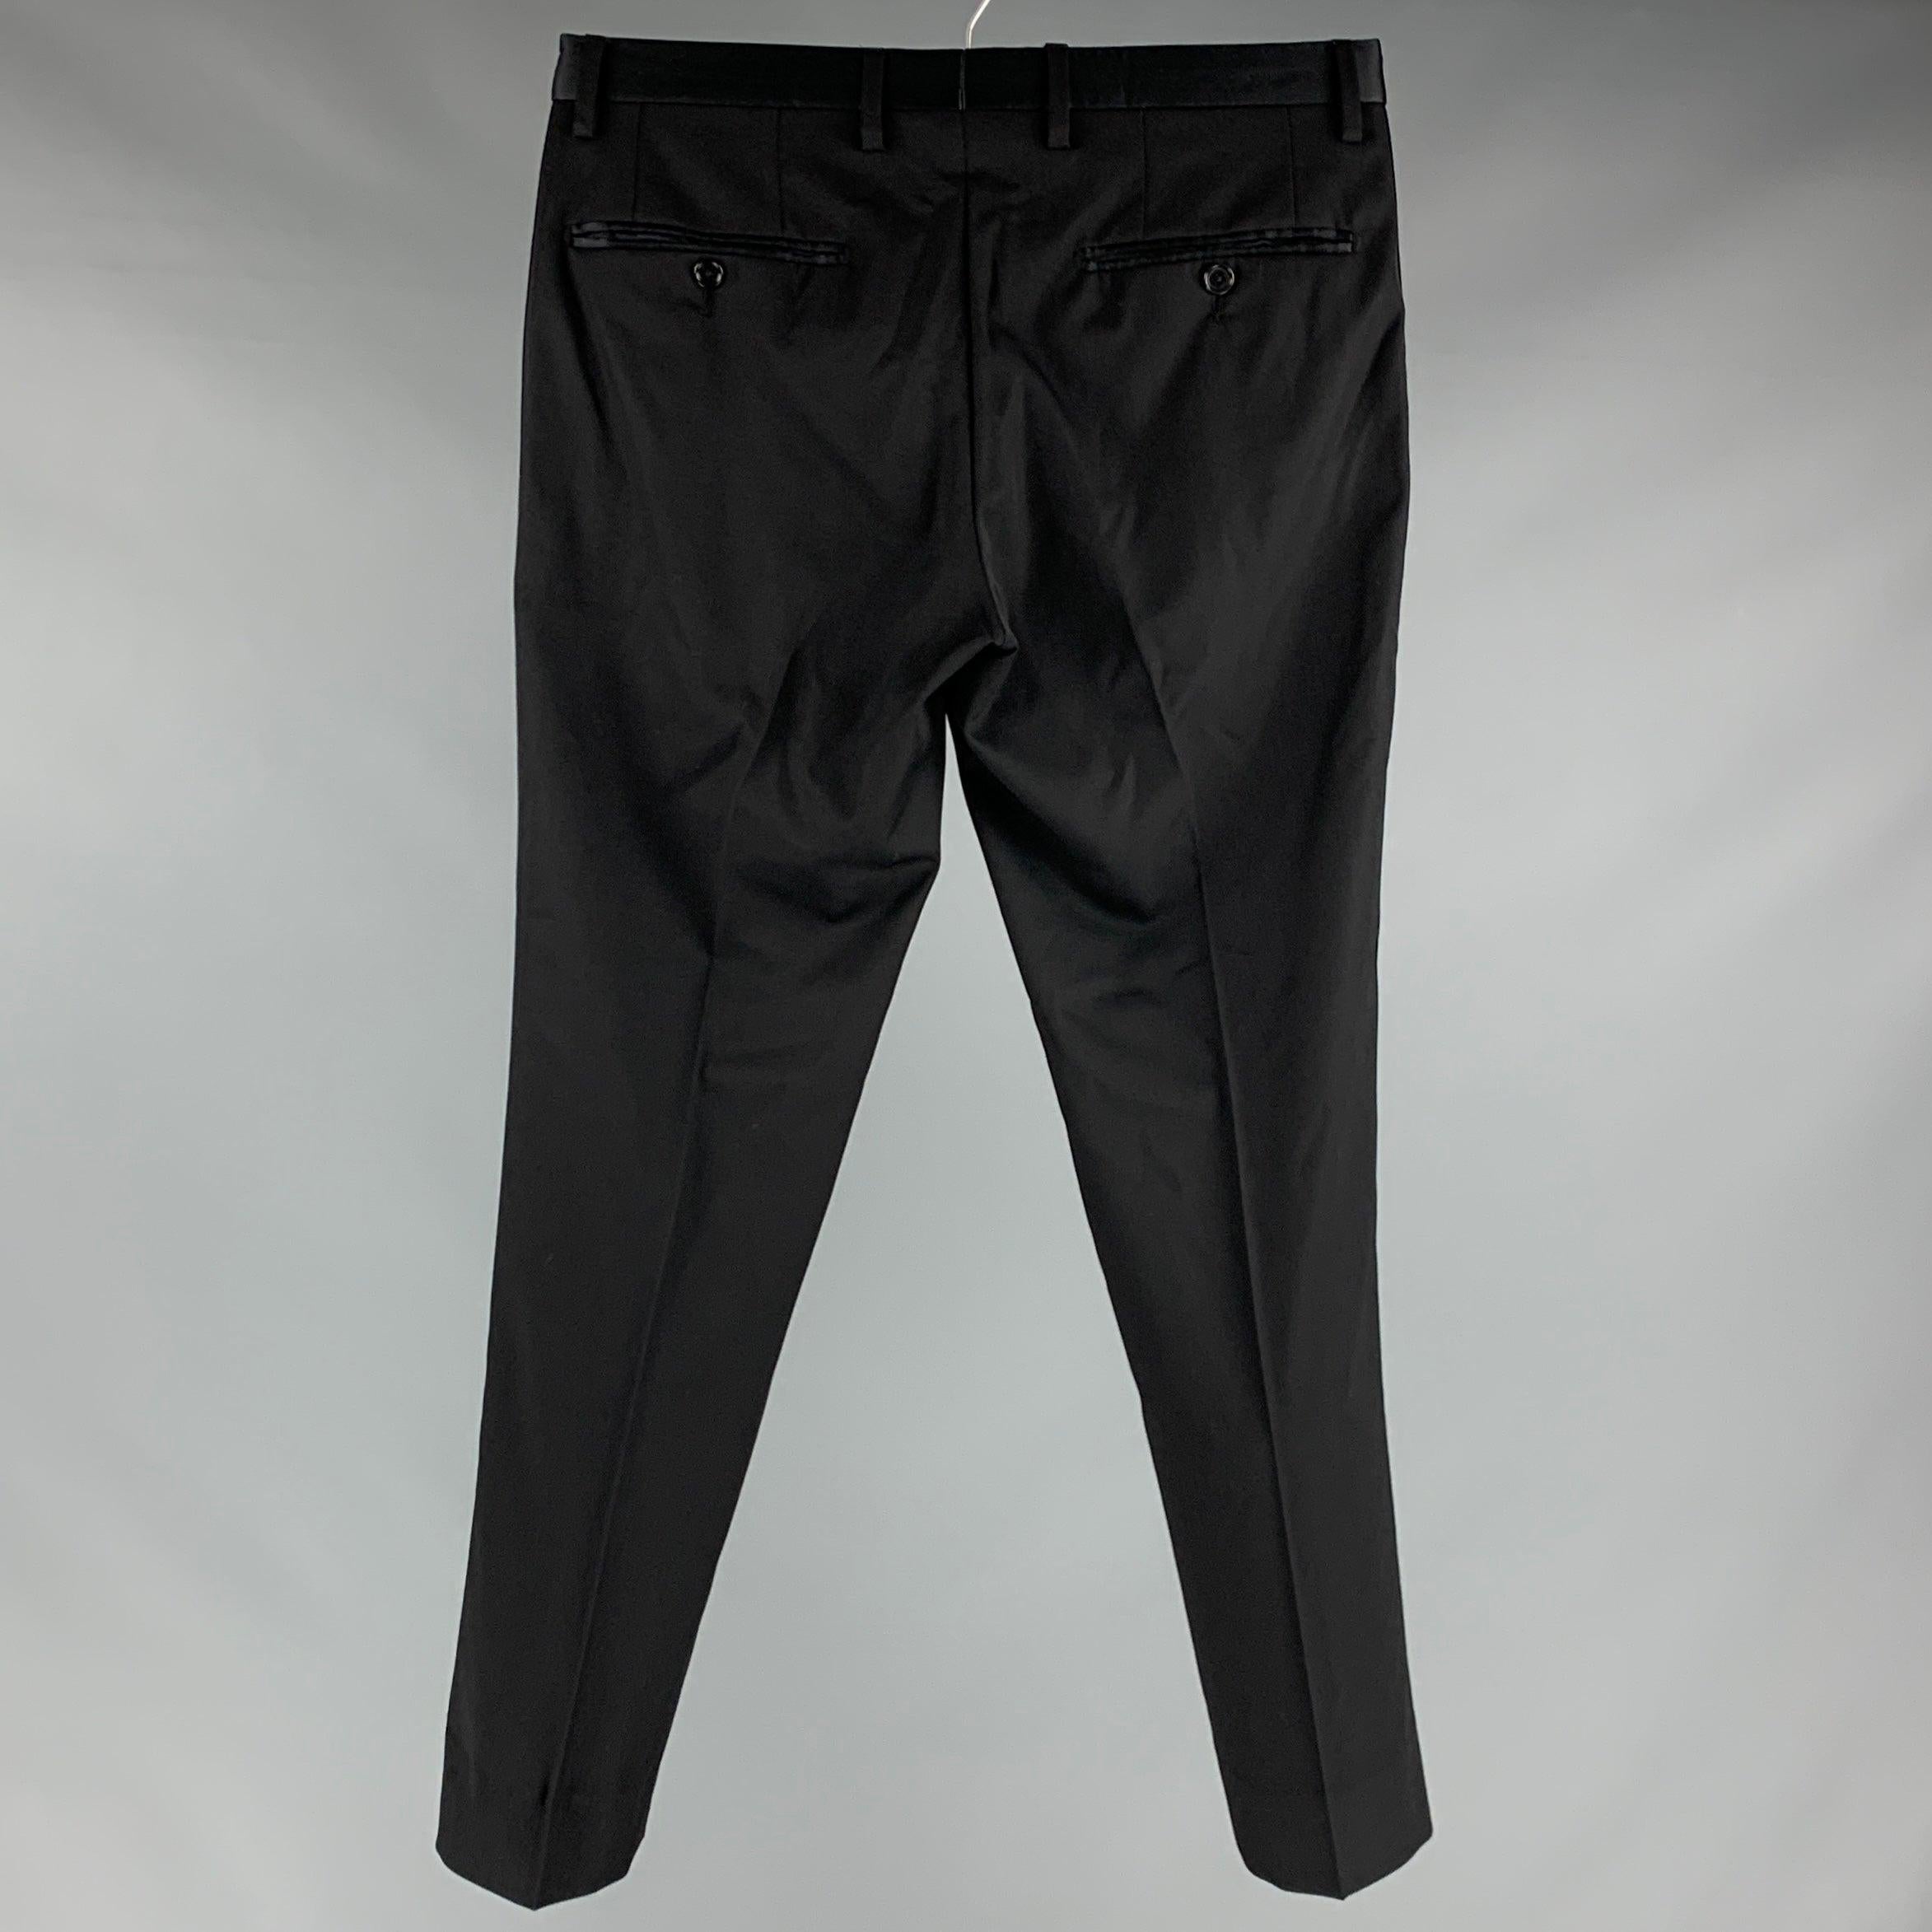 DOLCE & GABBANA Size 28 Black Wool Blend Tuxedo Dress Pants In Good Condition For Sale In San Francisco, CA